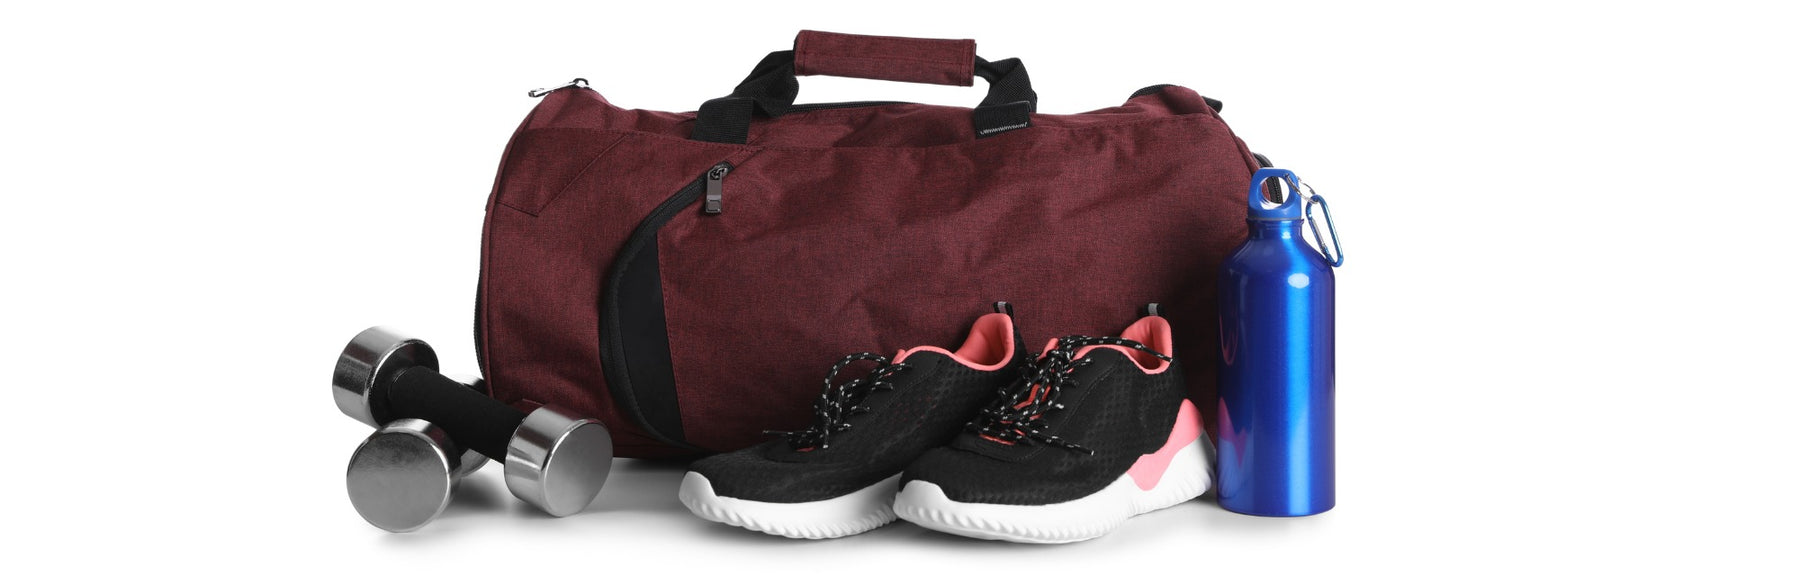 Duffle Bags in Bulk Are Perfect for Sports Teams and Giveaways